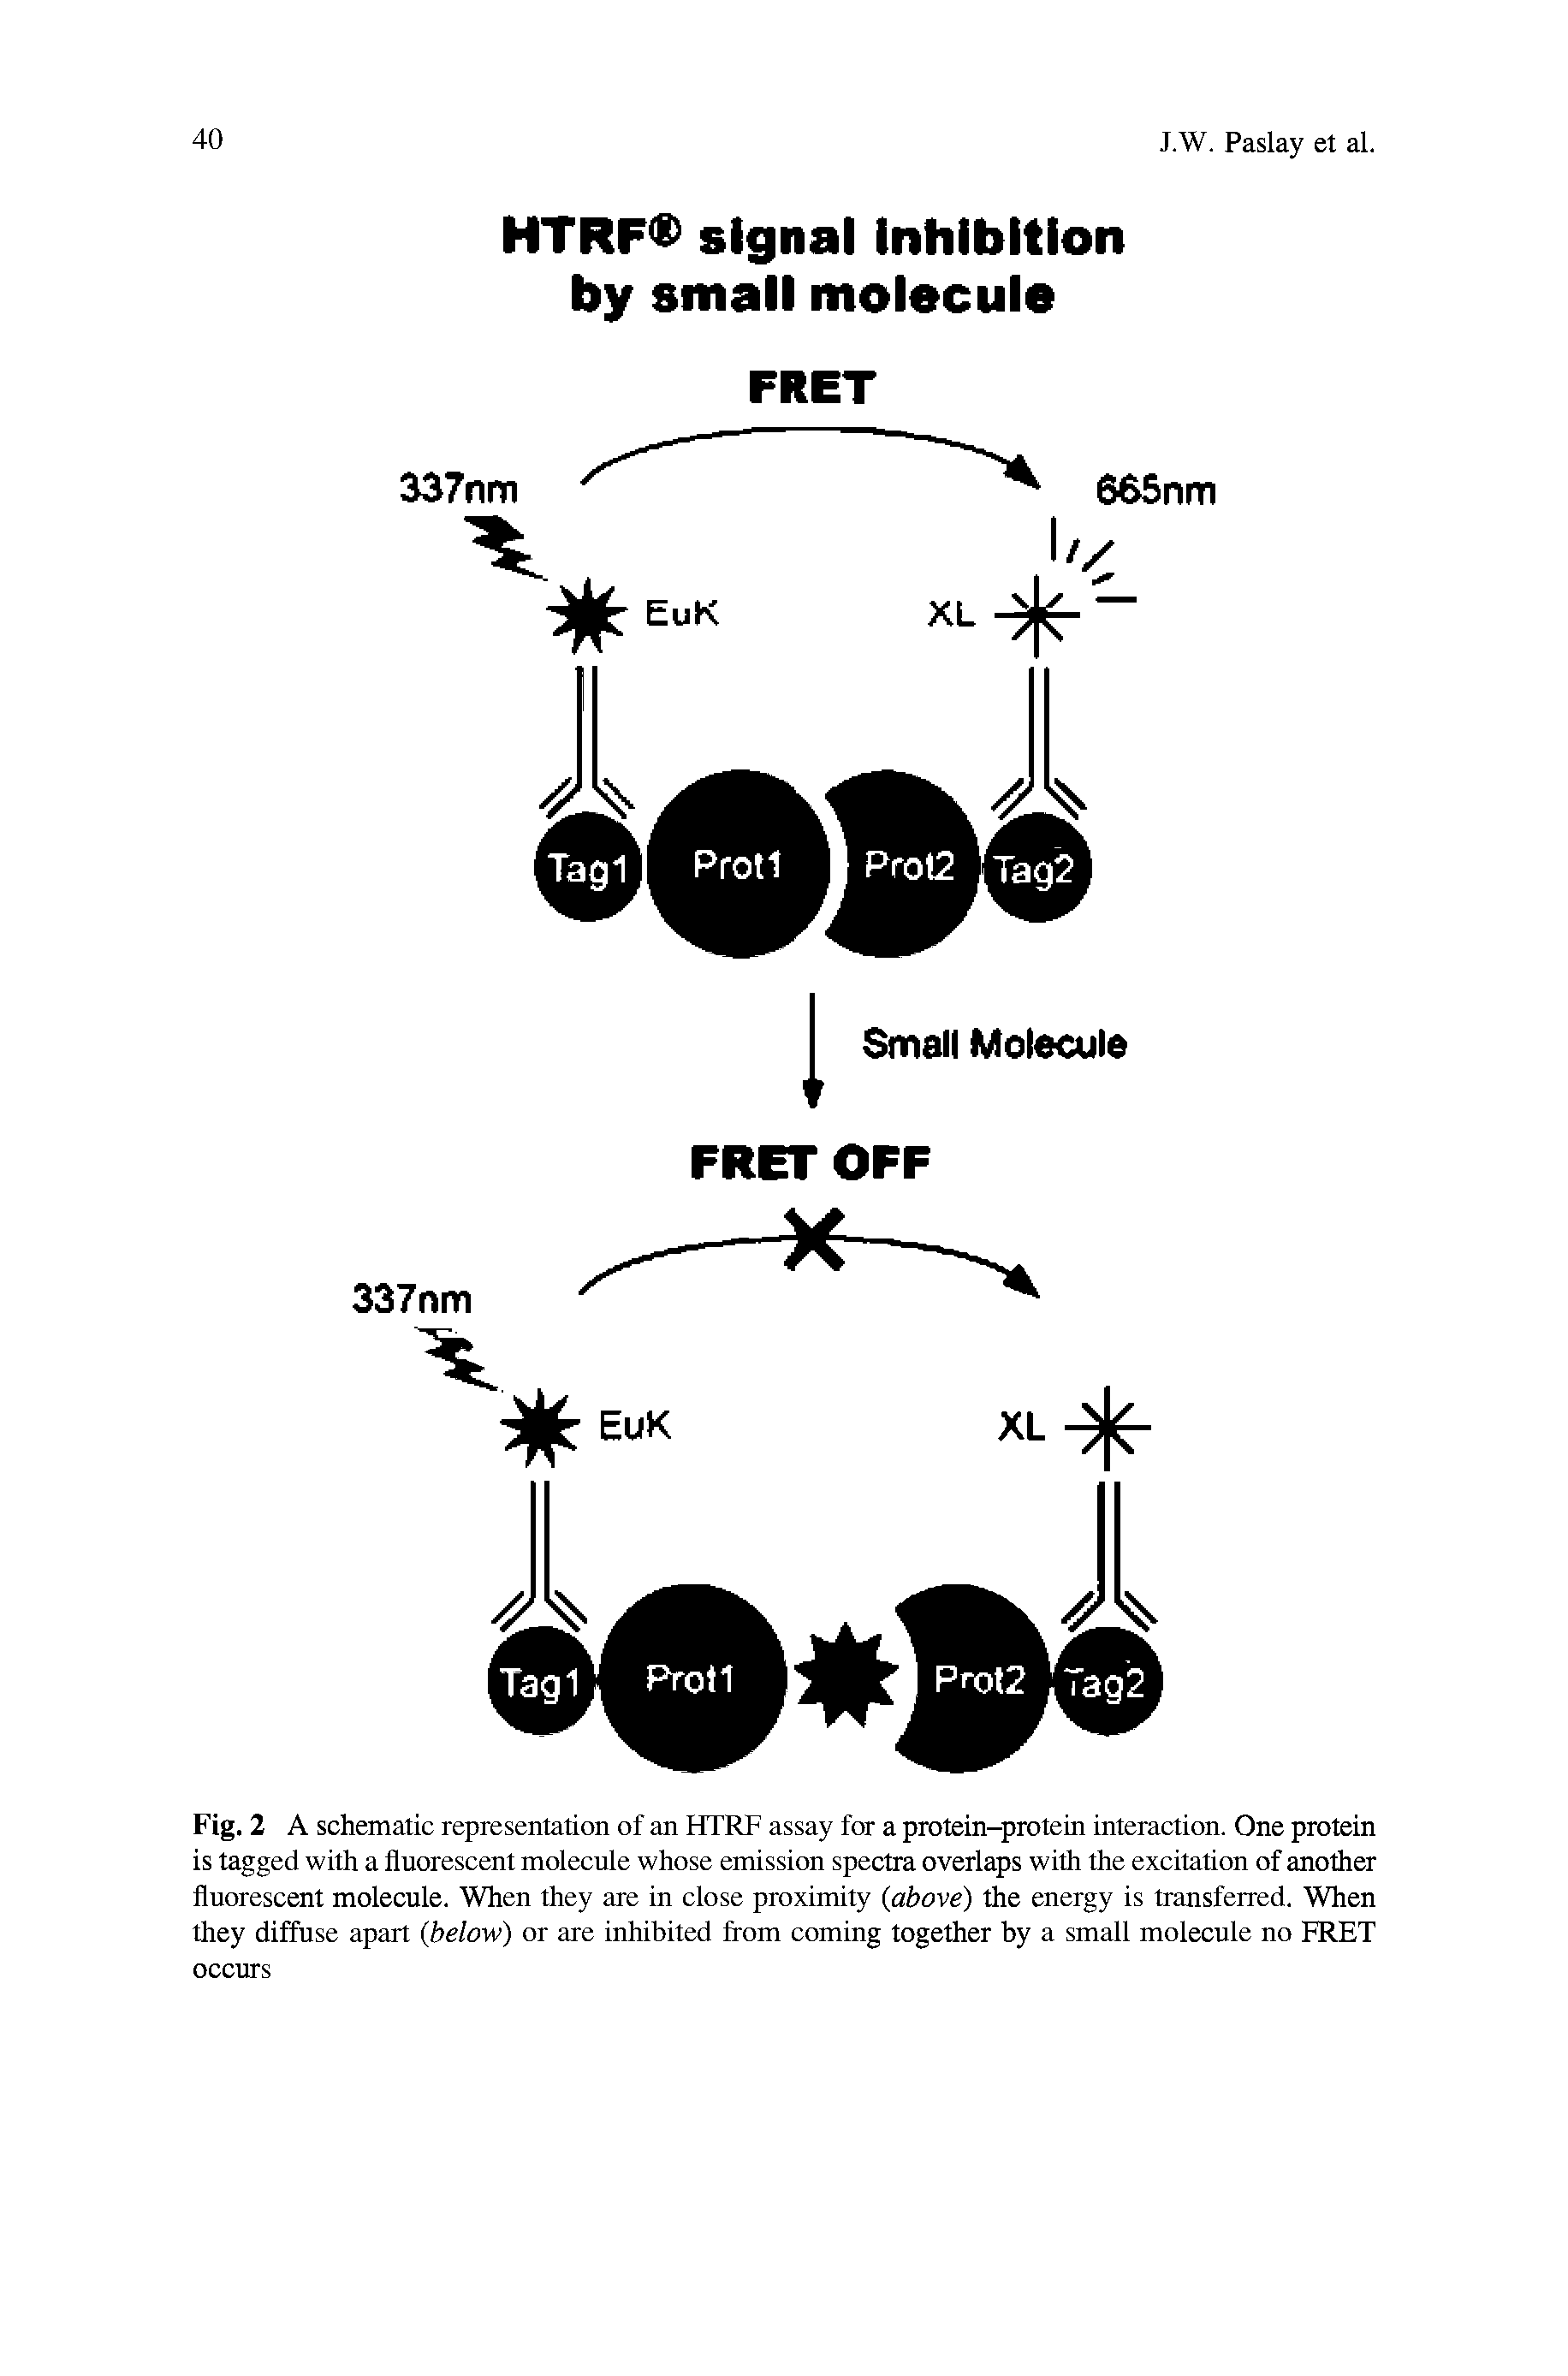 Fig. 2 A schematic representation of an HTRF assay for a protein-protein interaction. One protein is tagged with a fluorescent molecule whose emission spectra overlaps with the excitation of another fluorescent molecule. When they are in close proximity (above) the energy is transferred. When they diffuse apart (below) or are inhibited from coming together by a small molecule no FRET occurs...